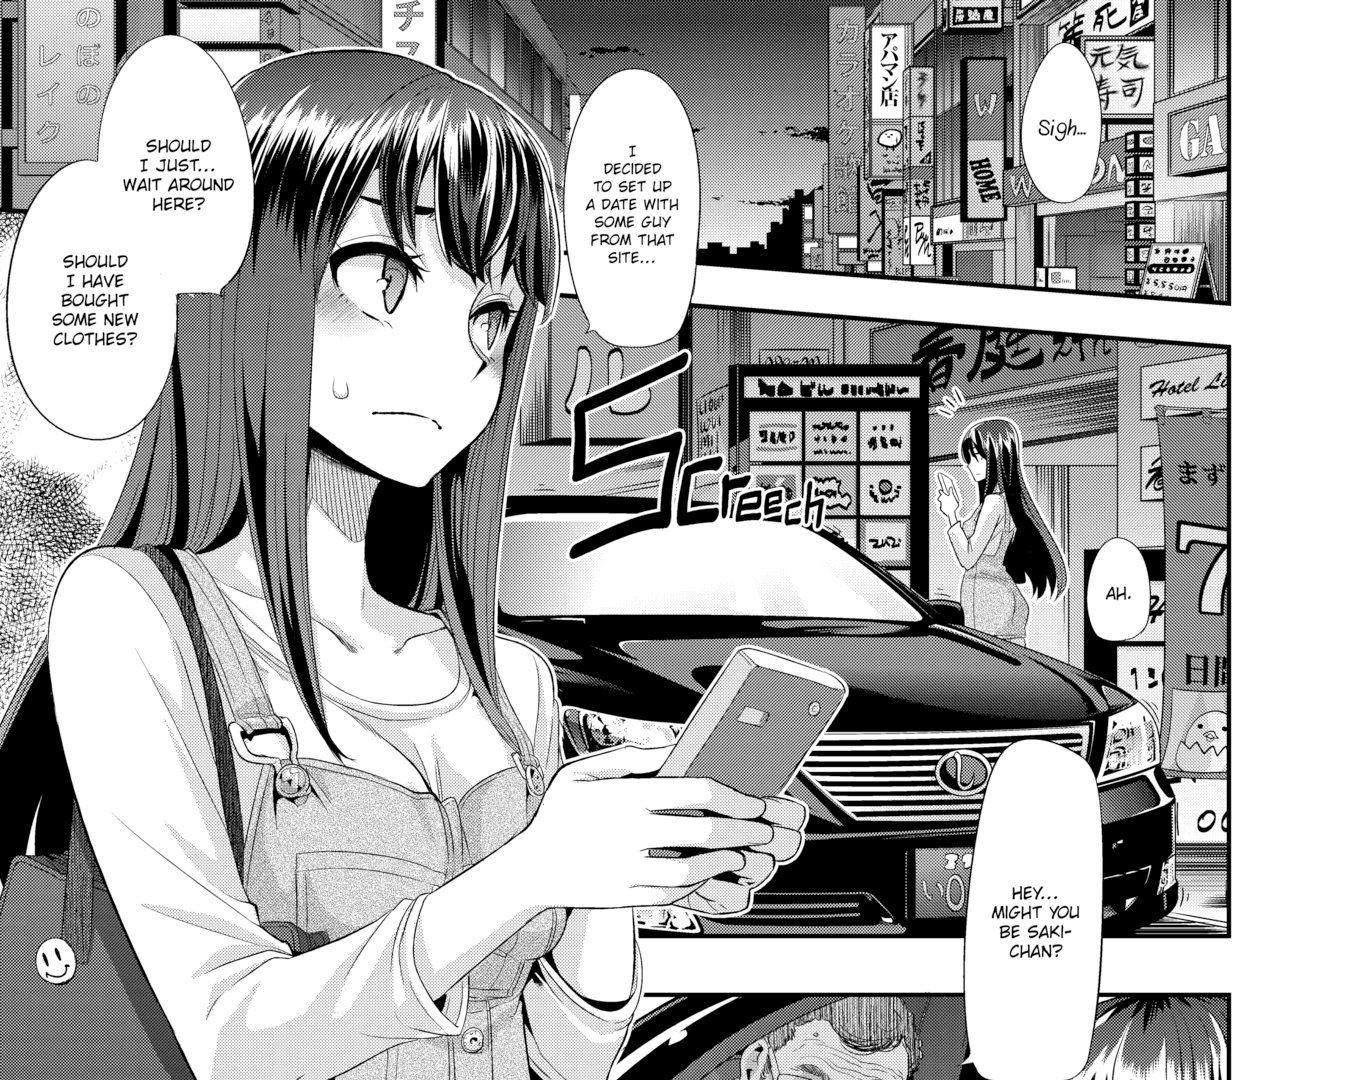 FAKKU on Twitter: "The story continues with Chapter 2 of Metamorphosis by ...